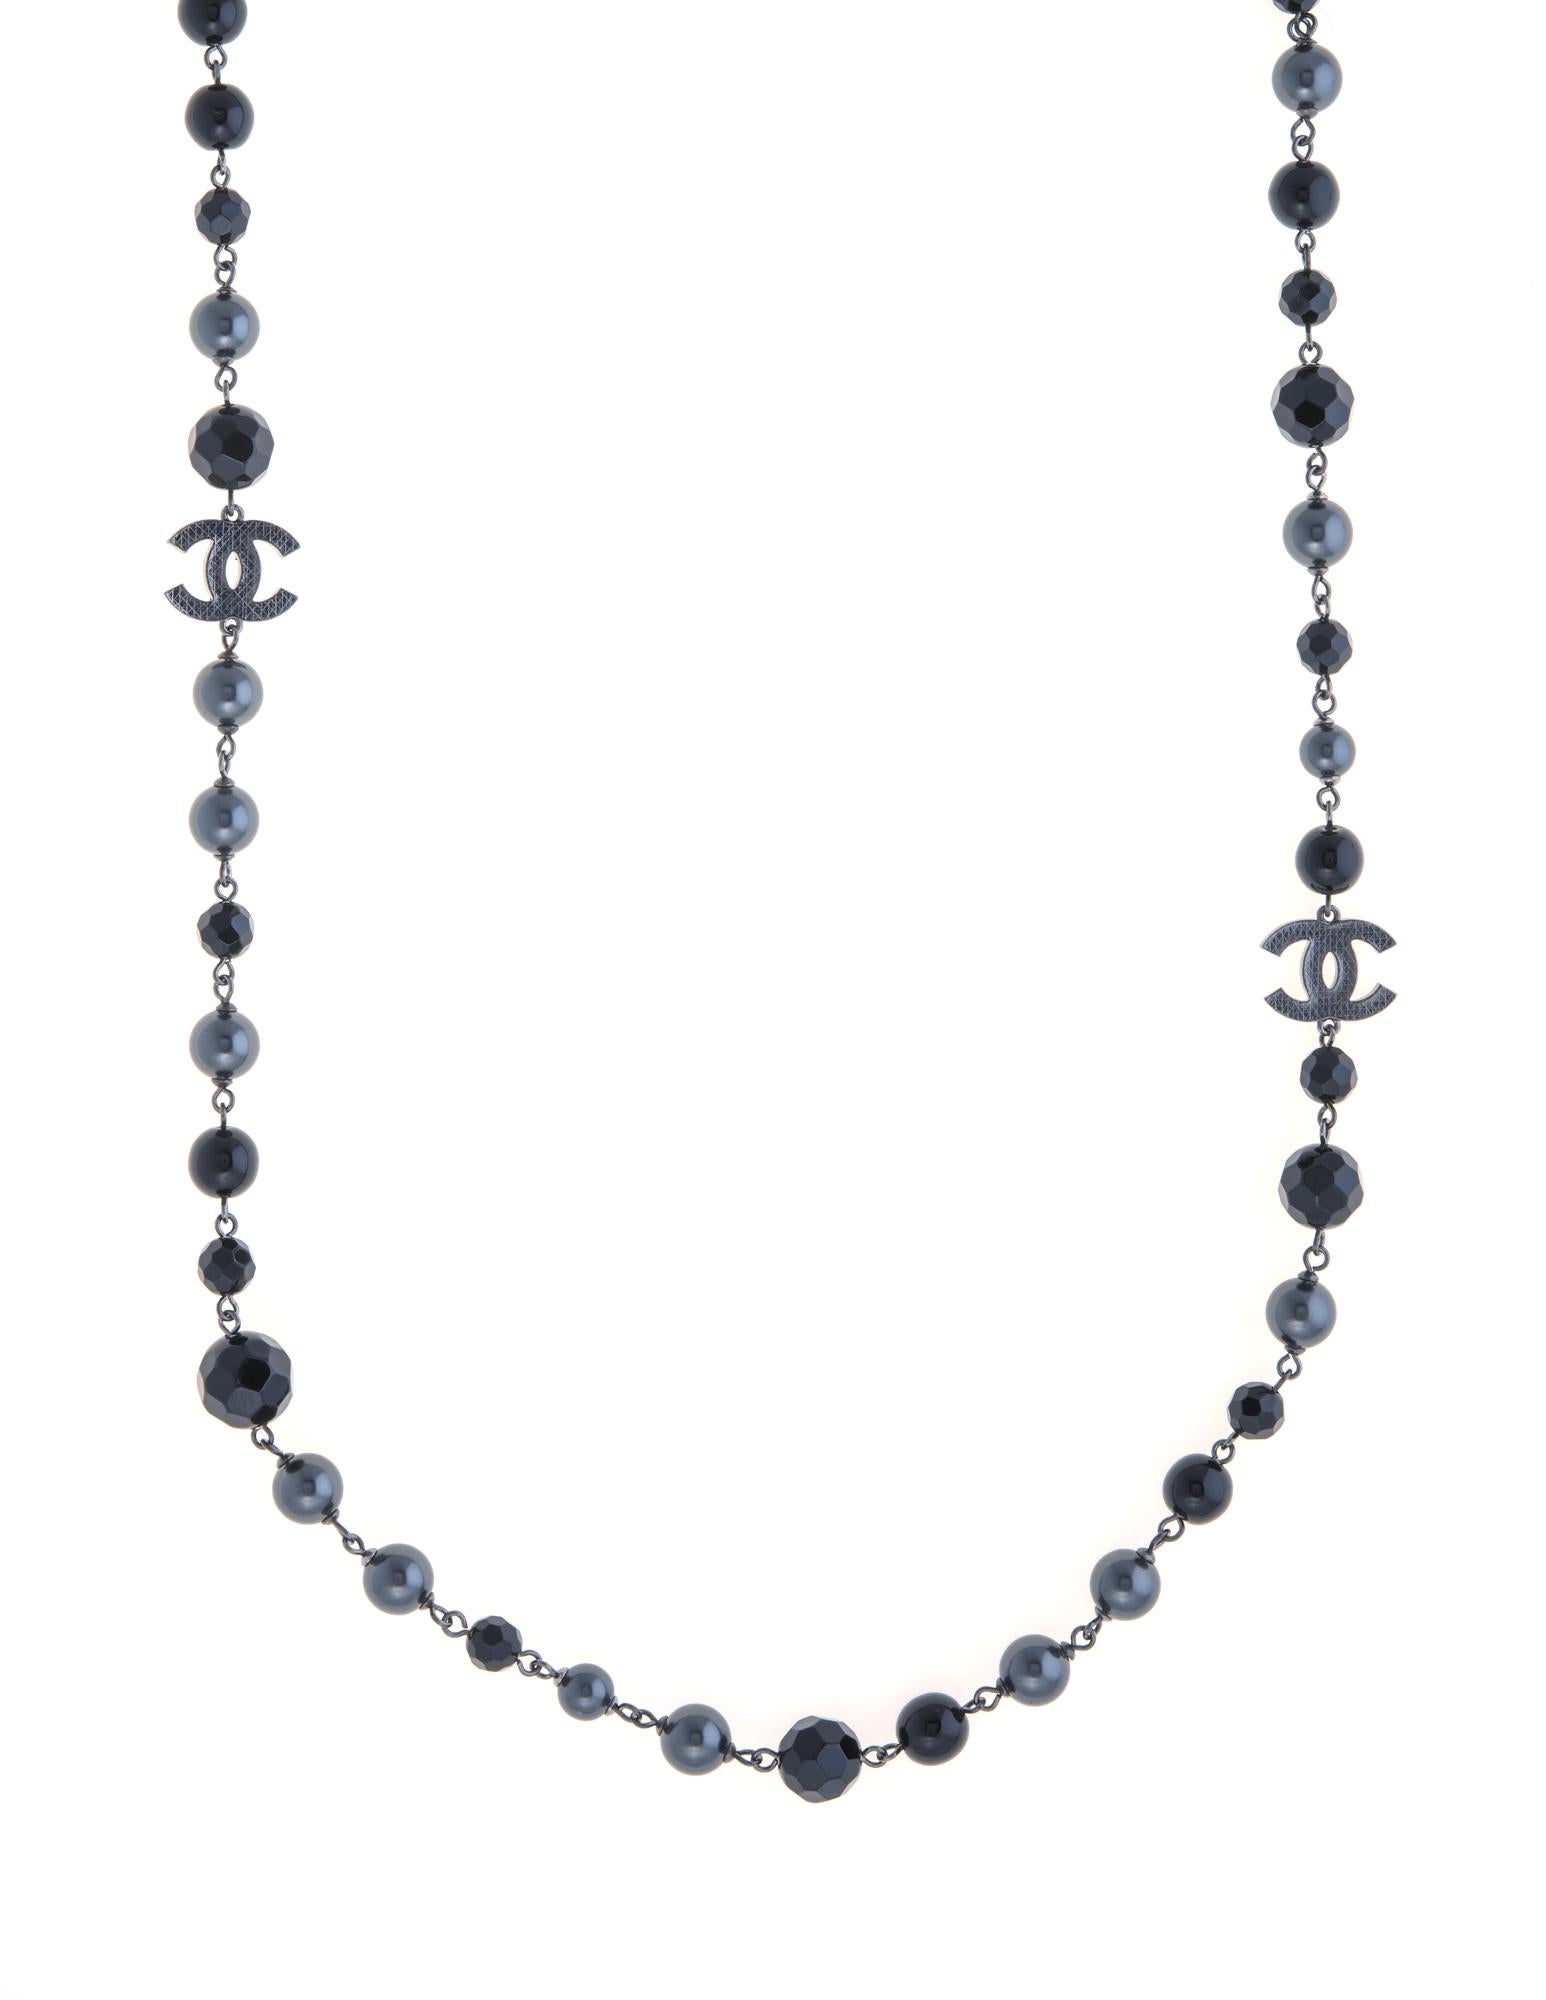 Pre-owned Chanel black faux pearl necklace crafted in silver tone (circa 2014). 

The necklace features 10mm faux black pearls with round and black faceted beads measuring 8mm to 12mm. Four CC logos separate the beads. The necklace can be worn as a